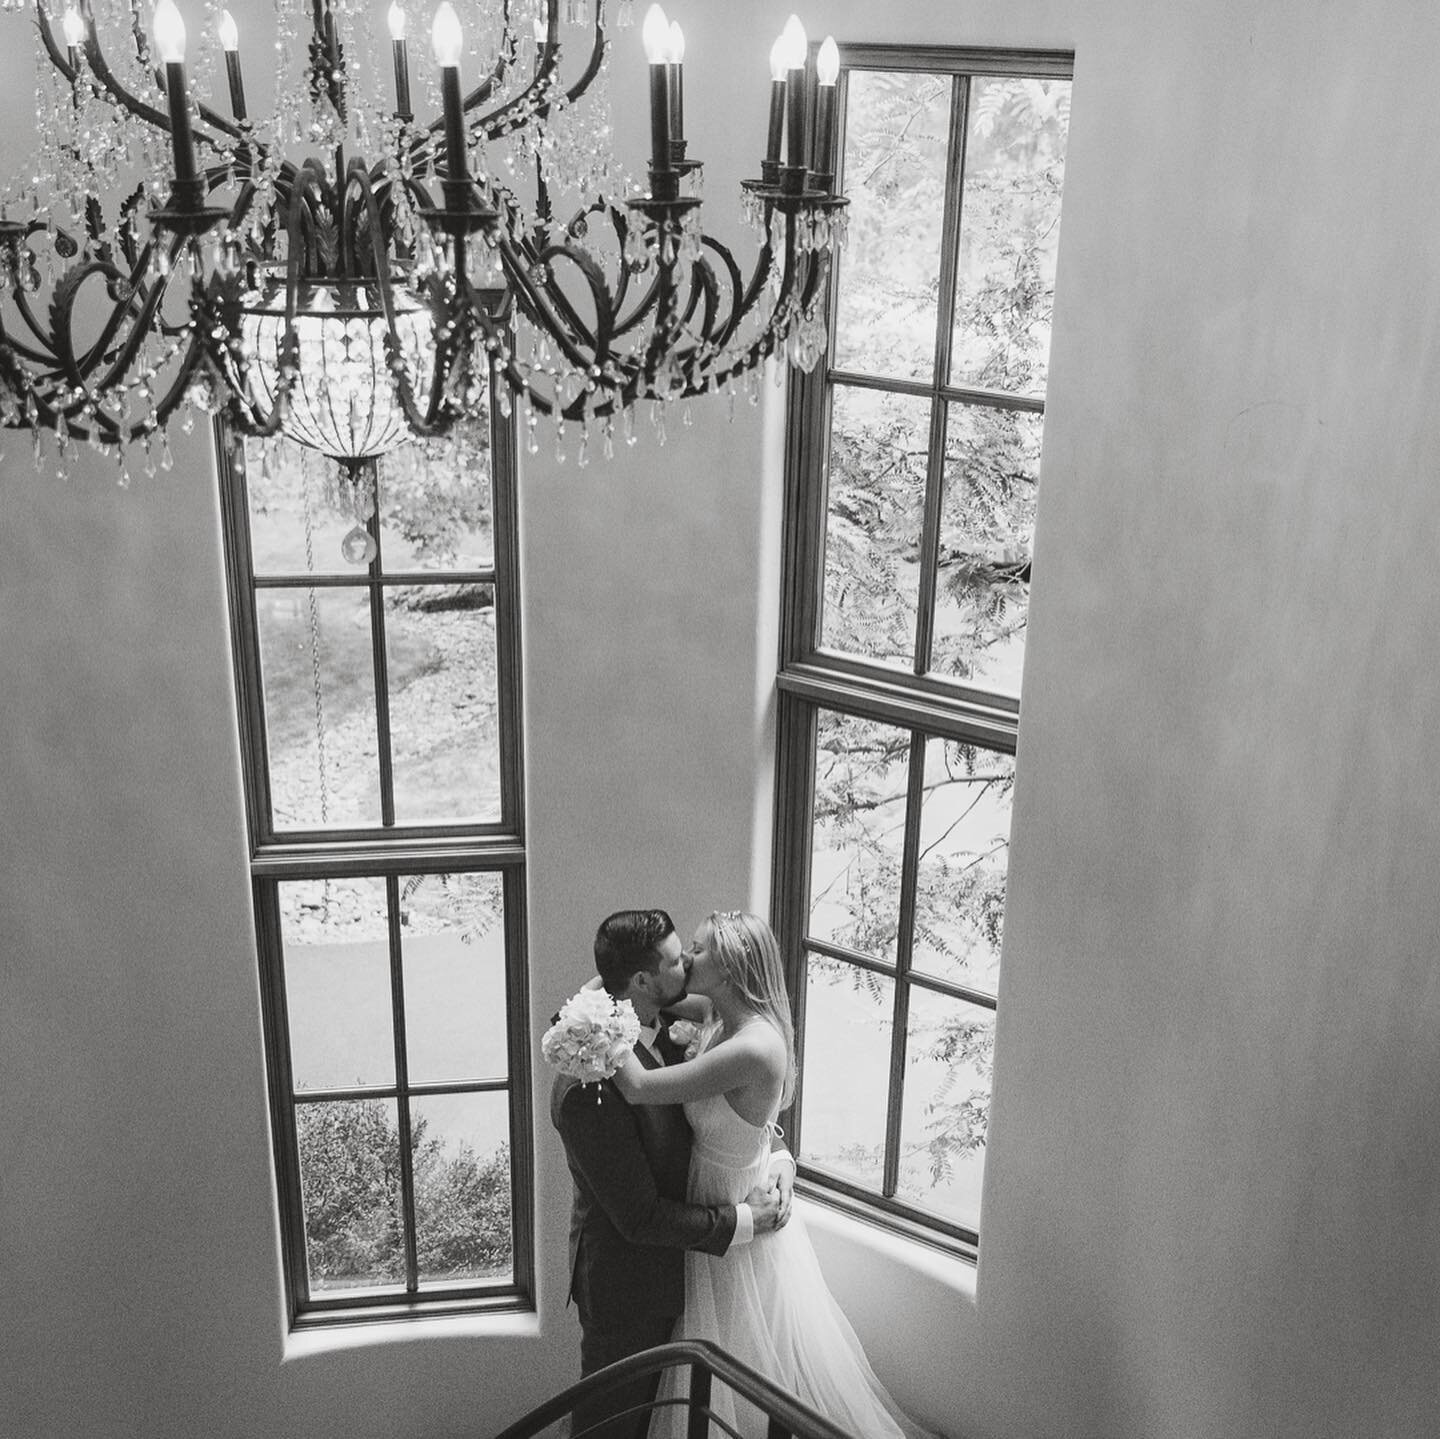 With only two months of wedding planning, Rachel, Derrick, and their families put together the sweetest intimate wedding in Sunriver last week. 

In an astonishing estate with a backyard to the Deschutes river, the couple of 9+ years exchanged vows a